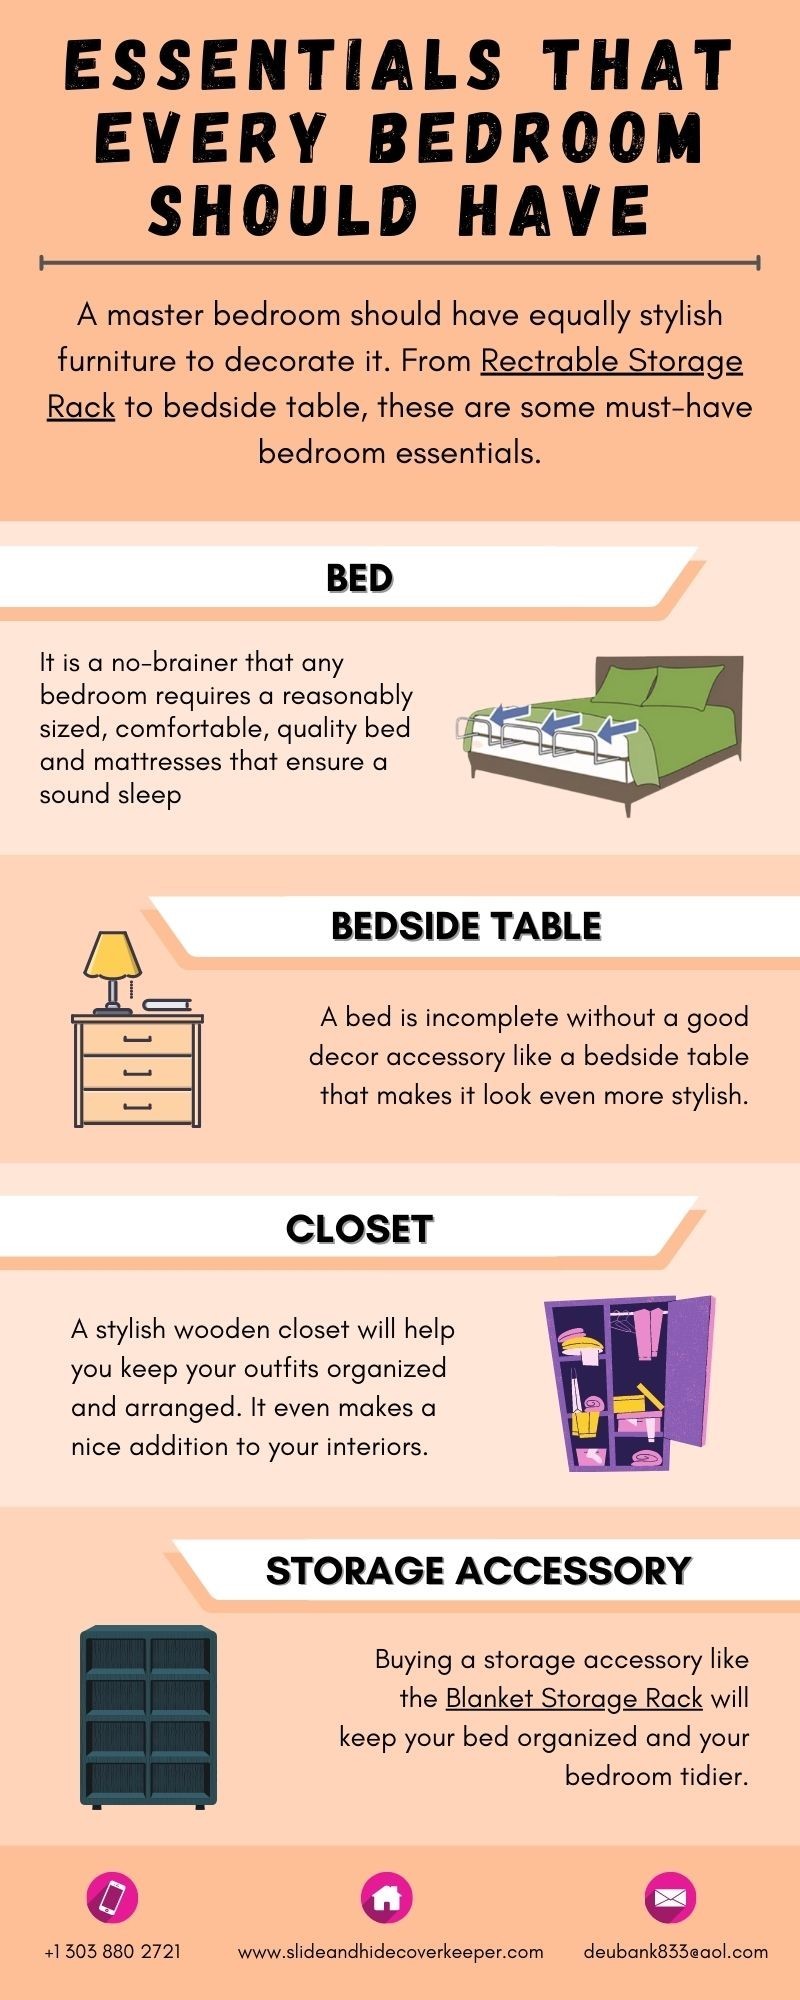 Essentials that Every Bedroom Should have